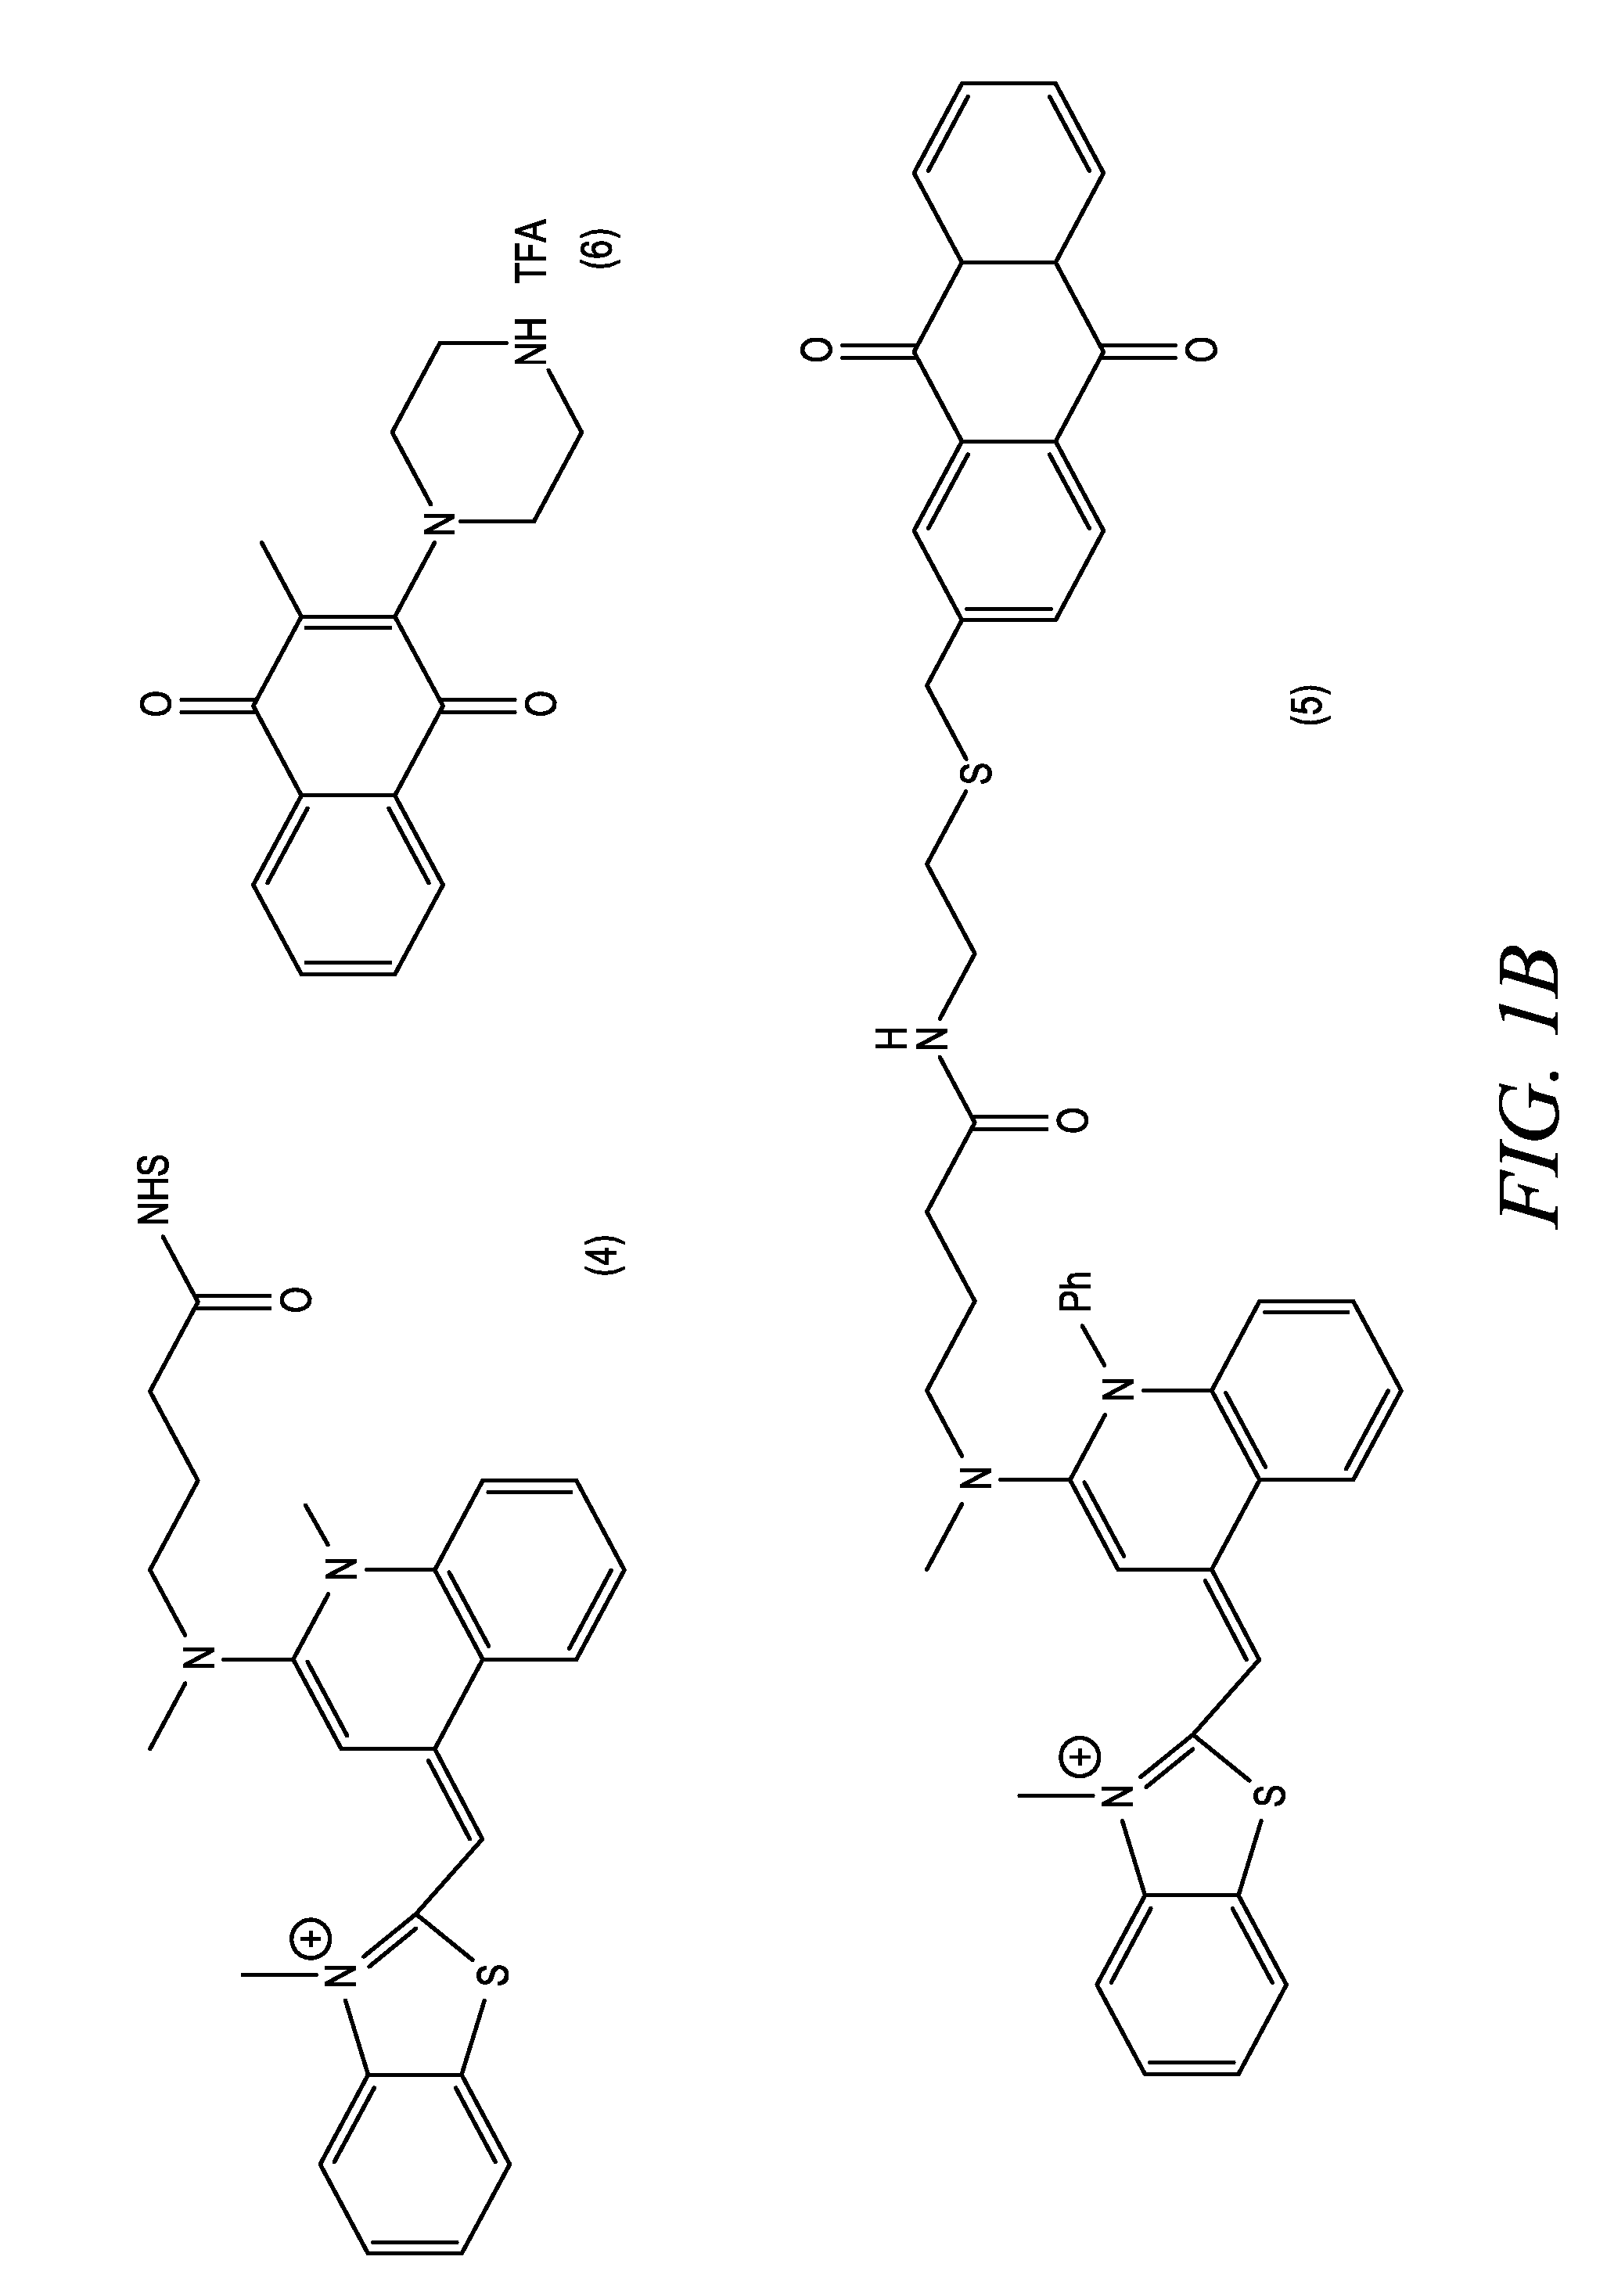 Chemical probe compounds that become fluorescent upon reduction, and methods for their use